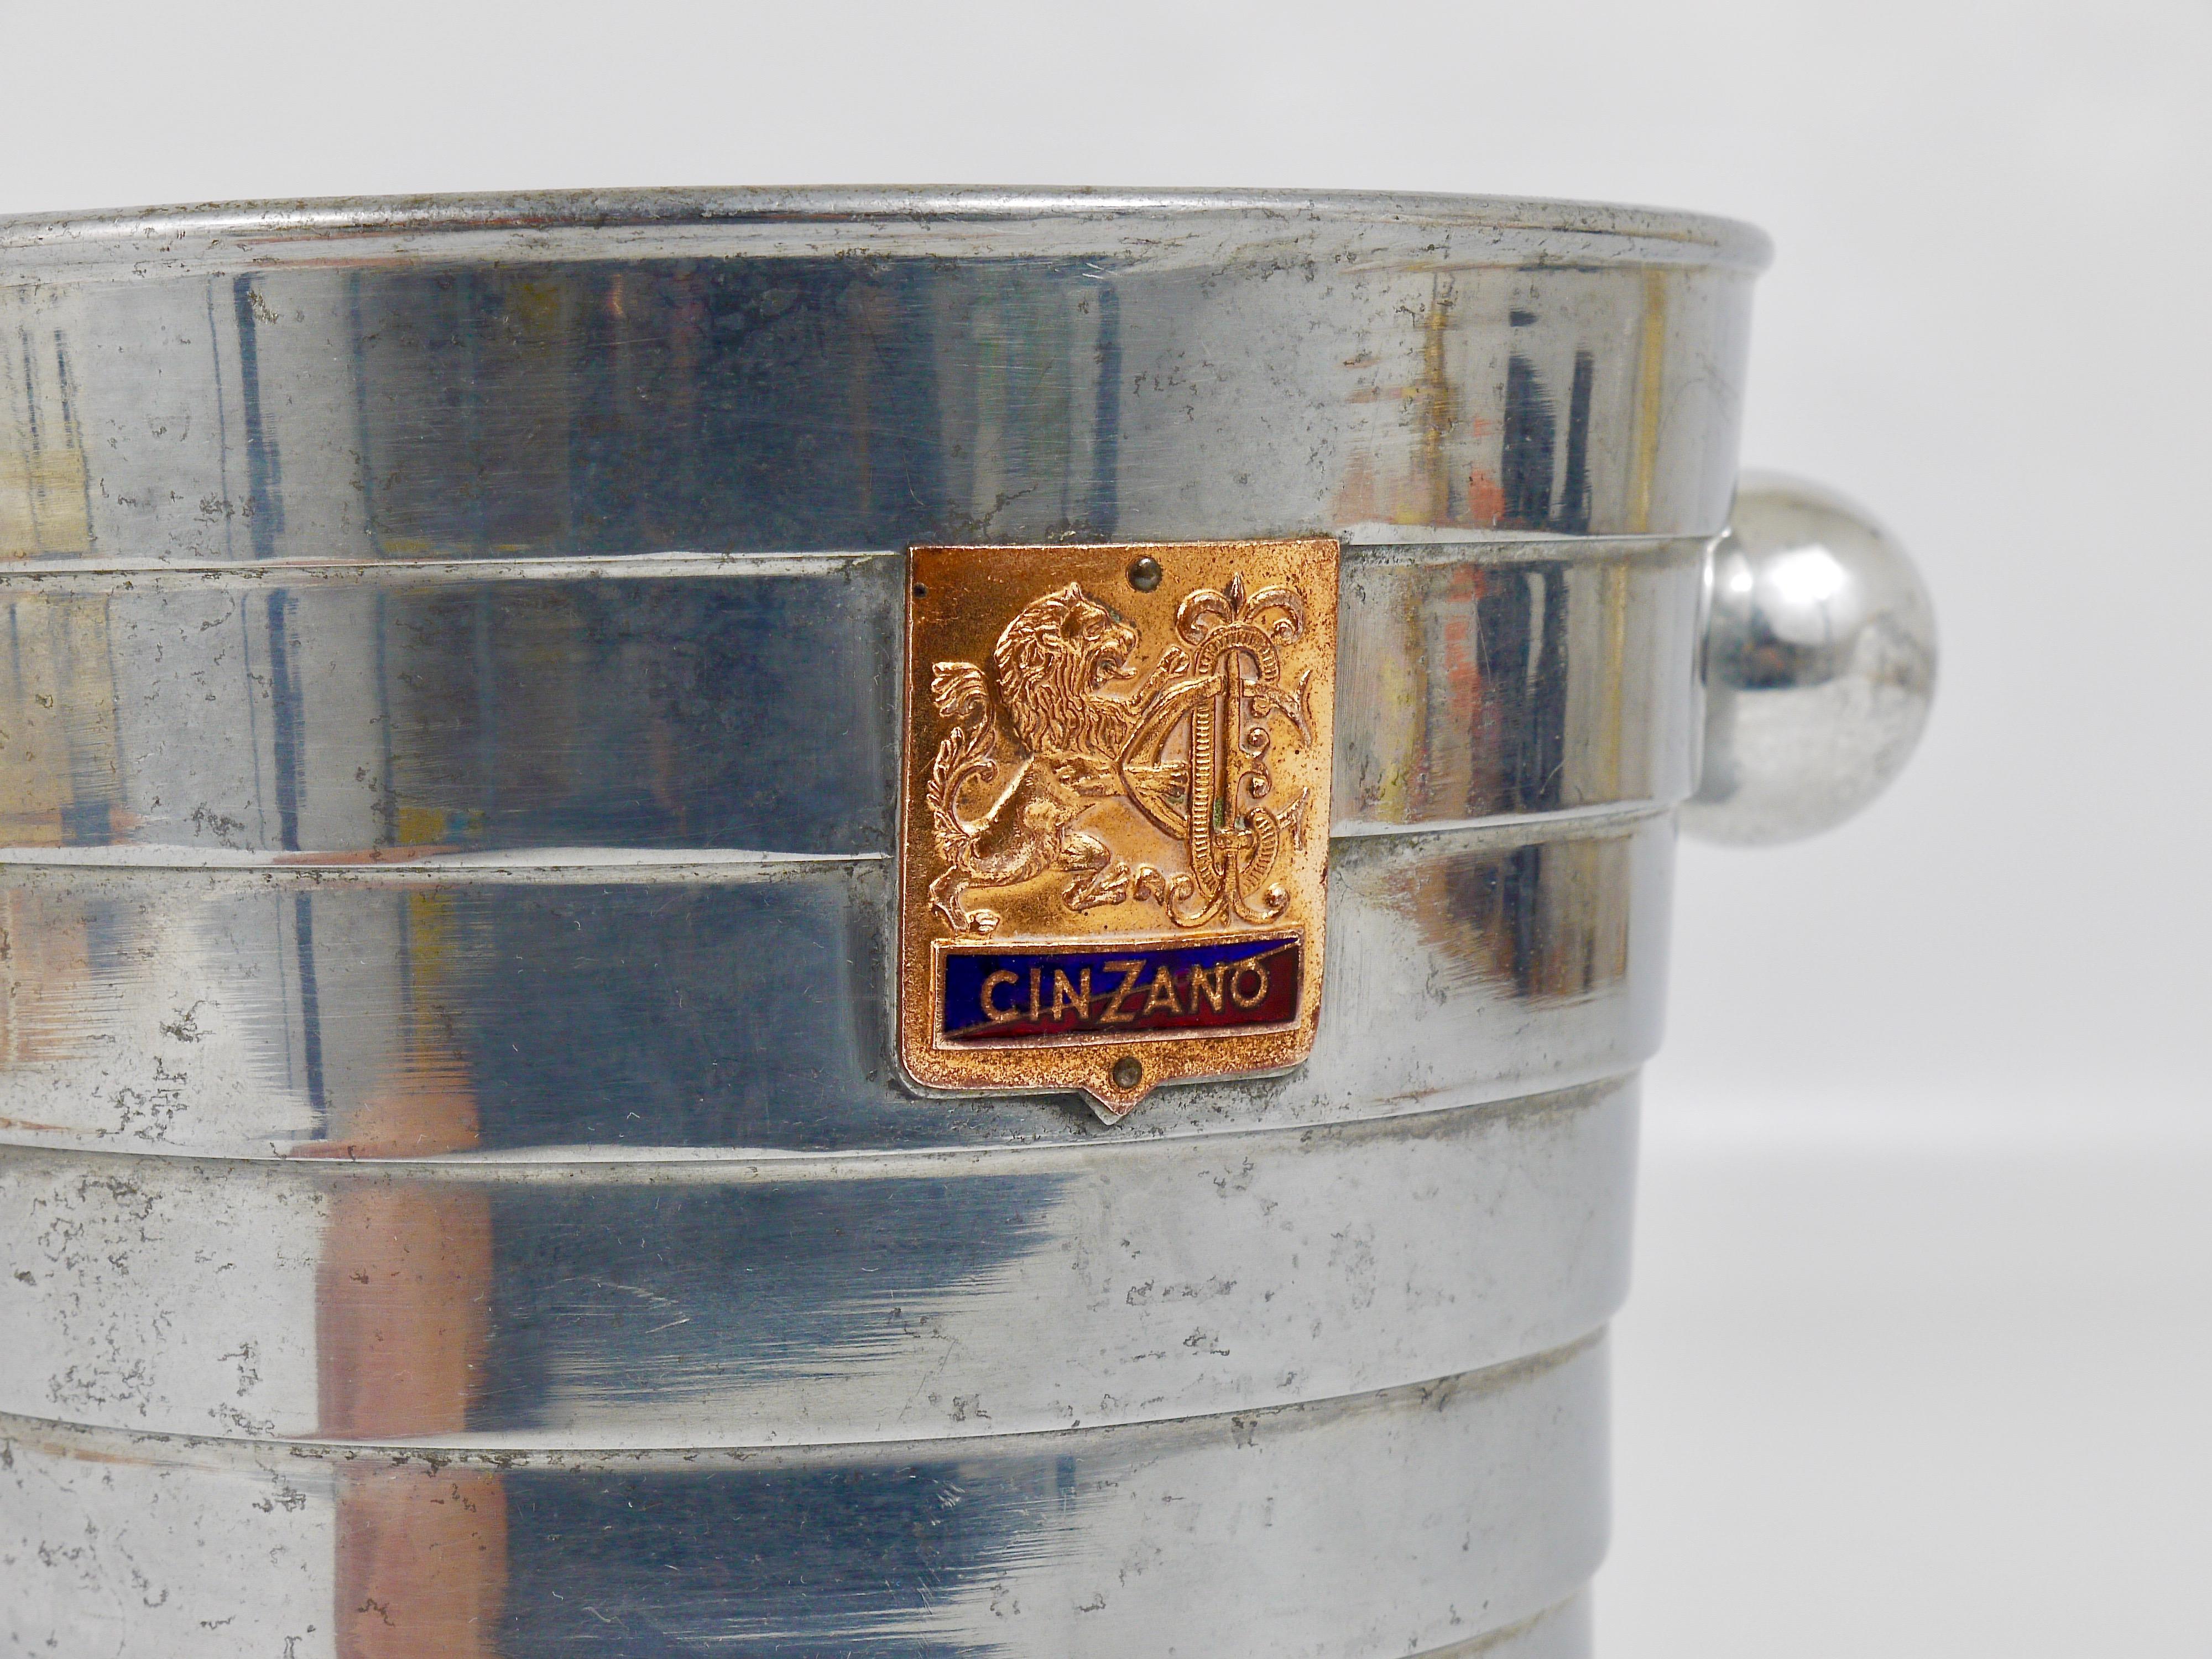 A stylish modernist Ice bucket or wine cooler from the 1950s by Cinzano. Made in Italy. Made of polished aluminum with nice ball handles and two charming enameled copper badges with the Cinzano logo. In good condition with charming patina.